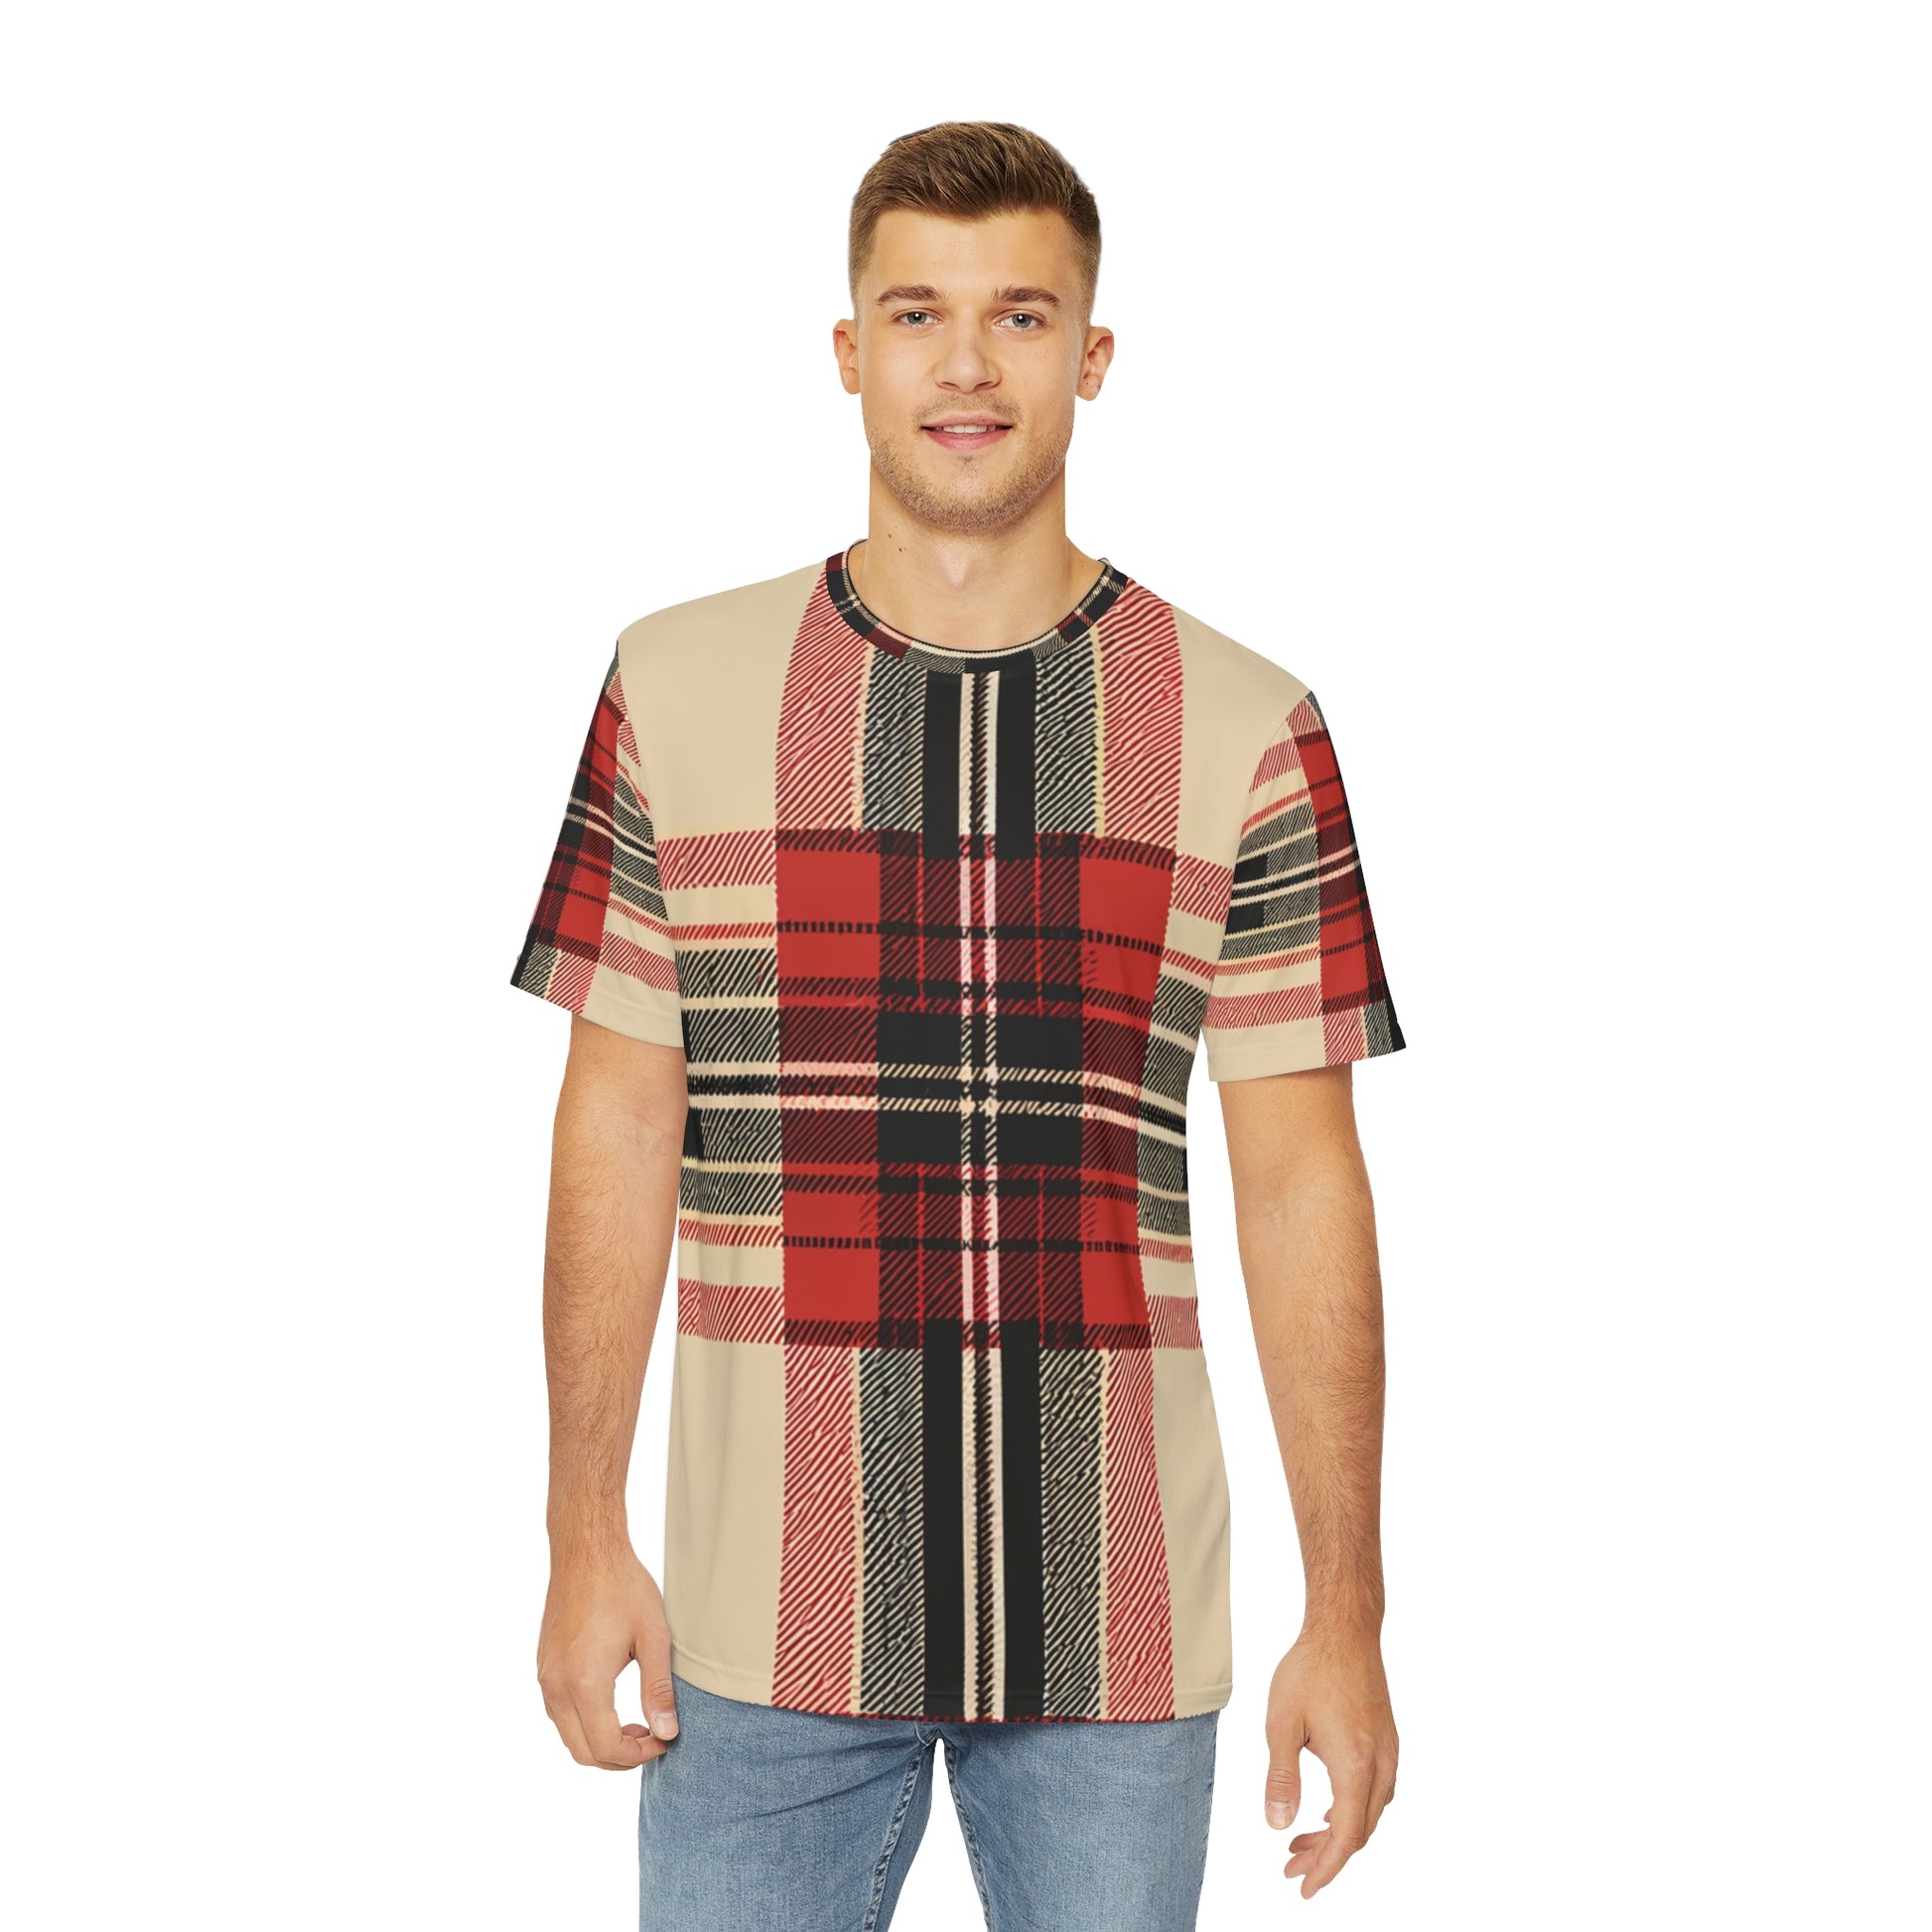 Front view of the Autumn Elegance Tartan Crewneck Pullover All-Over Print Short-Sleeved Shirt red black and beige background plaid pattern paired with casual denim pants worn by a white man